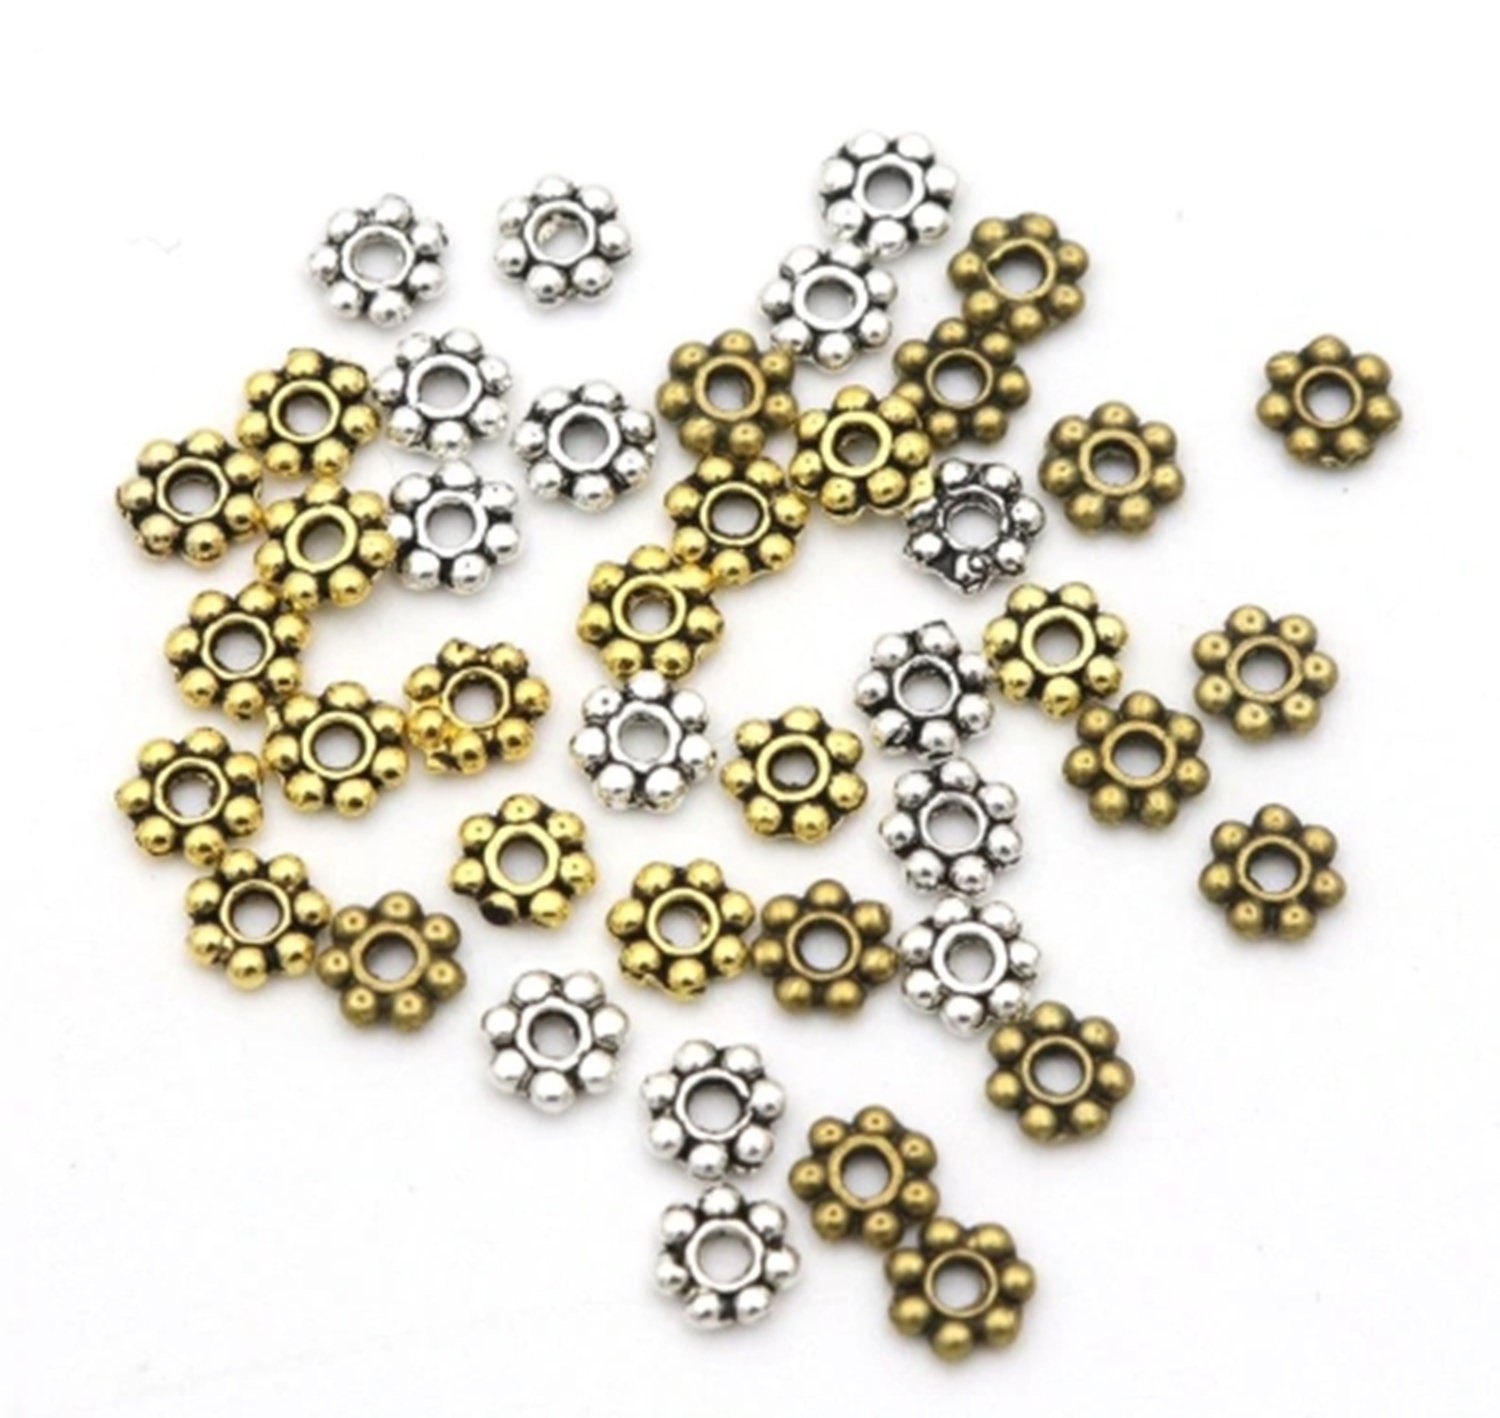 Wholesale 100/1000Pcs Tibetan Silver Daisy Spacer Beads Jewelry Making 4MM 6MM 